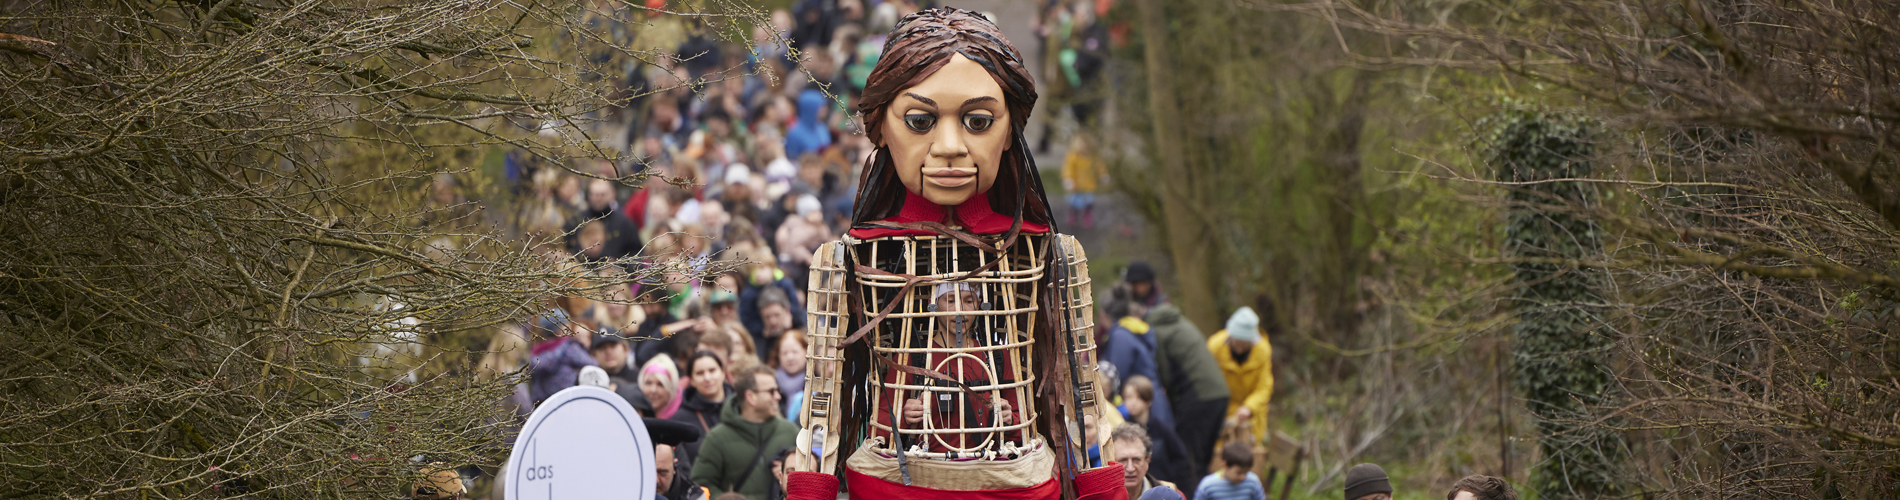 A crowd of people walk with Little Amal, a large 12 foot puppet of a brown haired child.